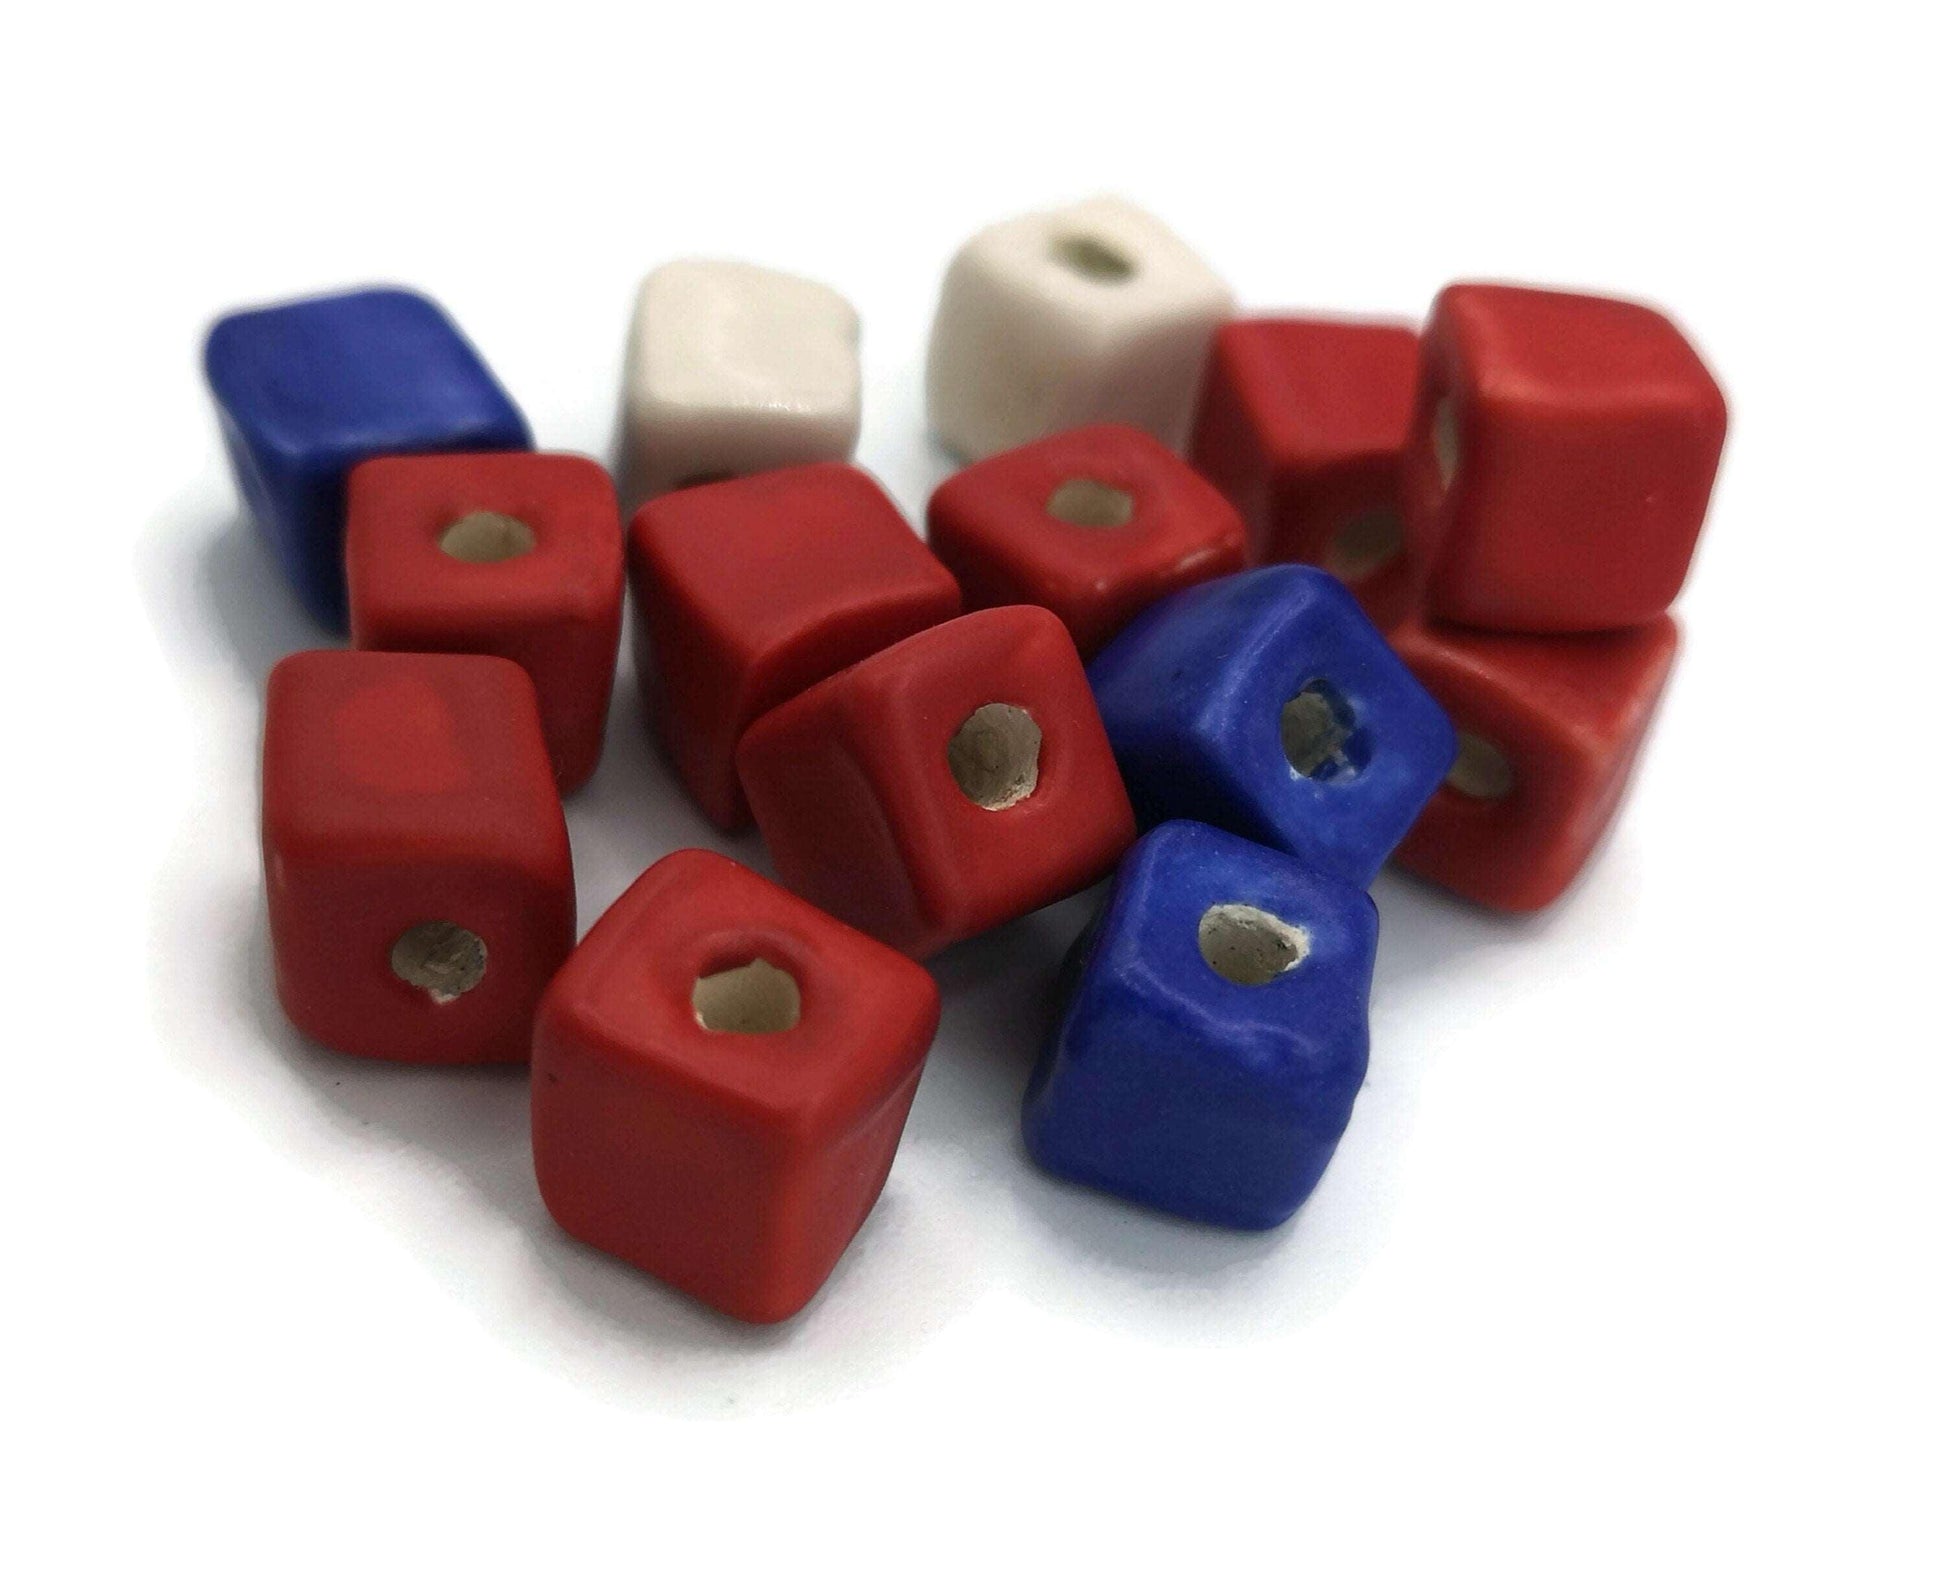 14 Pc Square Ceramic Beads Set, Assorted Royal Blue Red And White Porcelain Beads 10mm, Handmade Clay Jewelry Making Beads, Best Selling